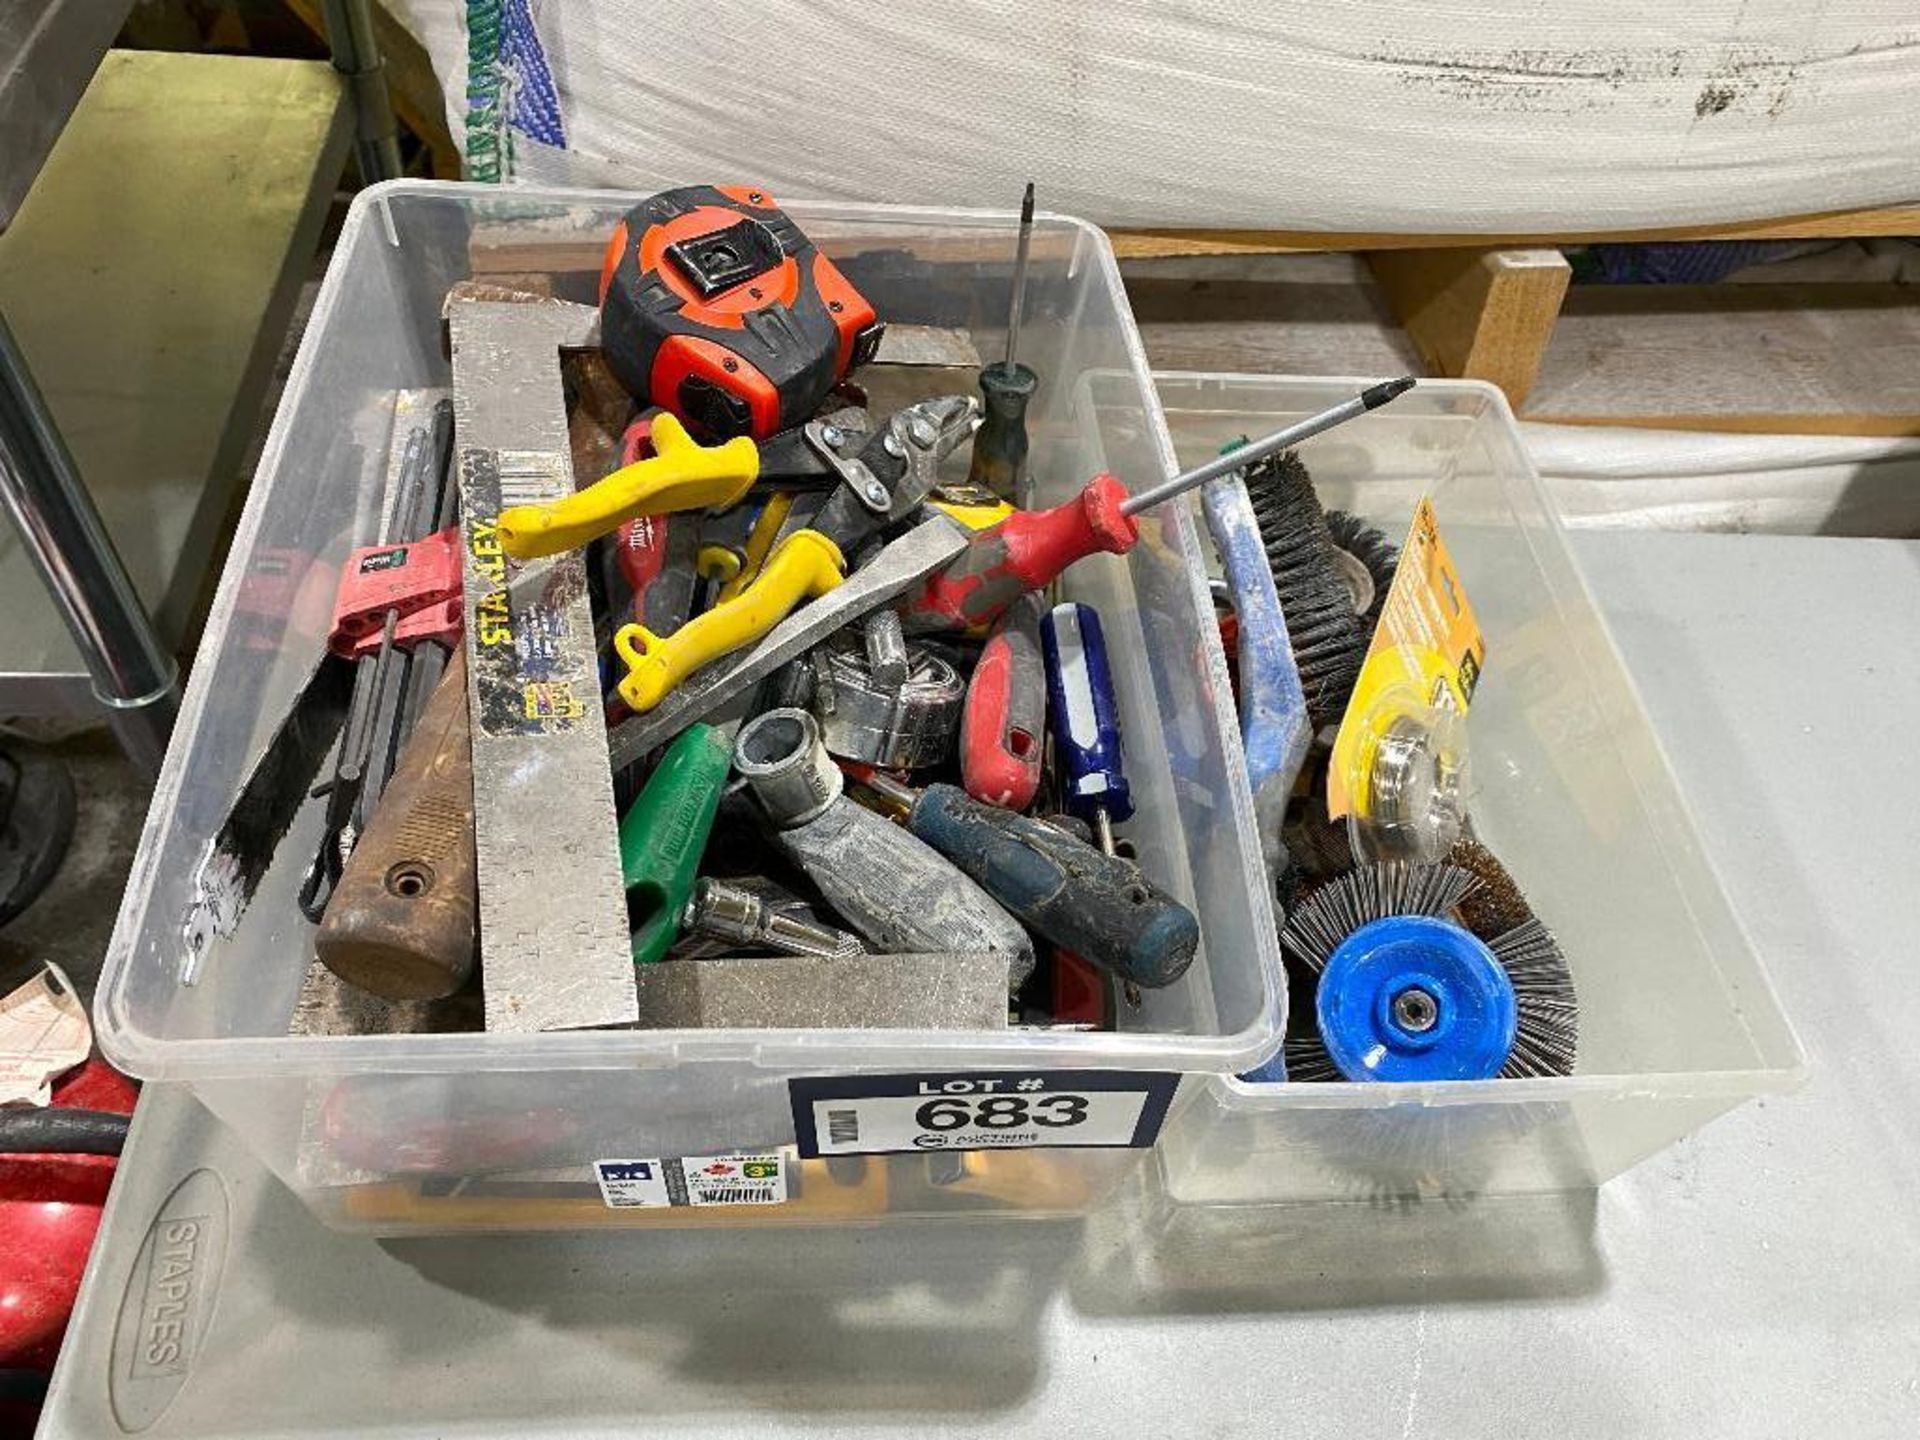 Lot of Asst. Tools including Snips, Squares, Screw Drivers, Tape Measure, etc.